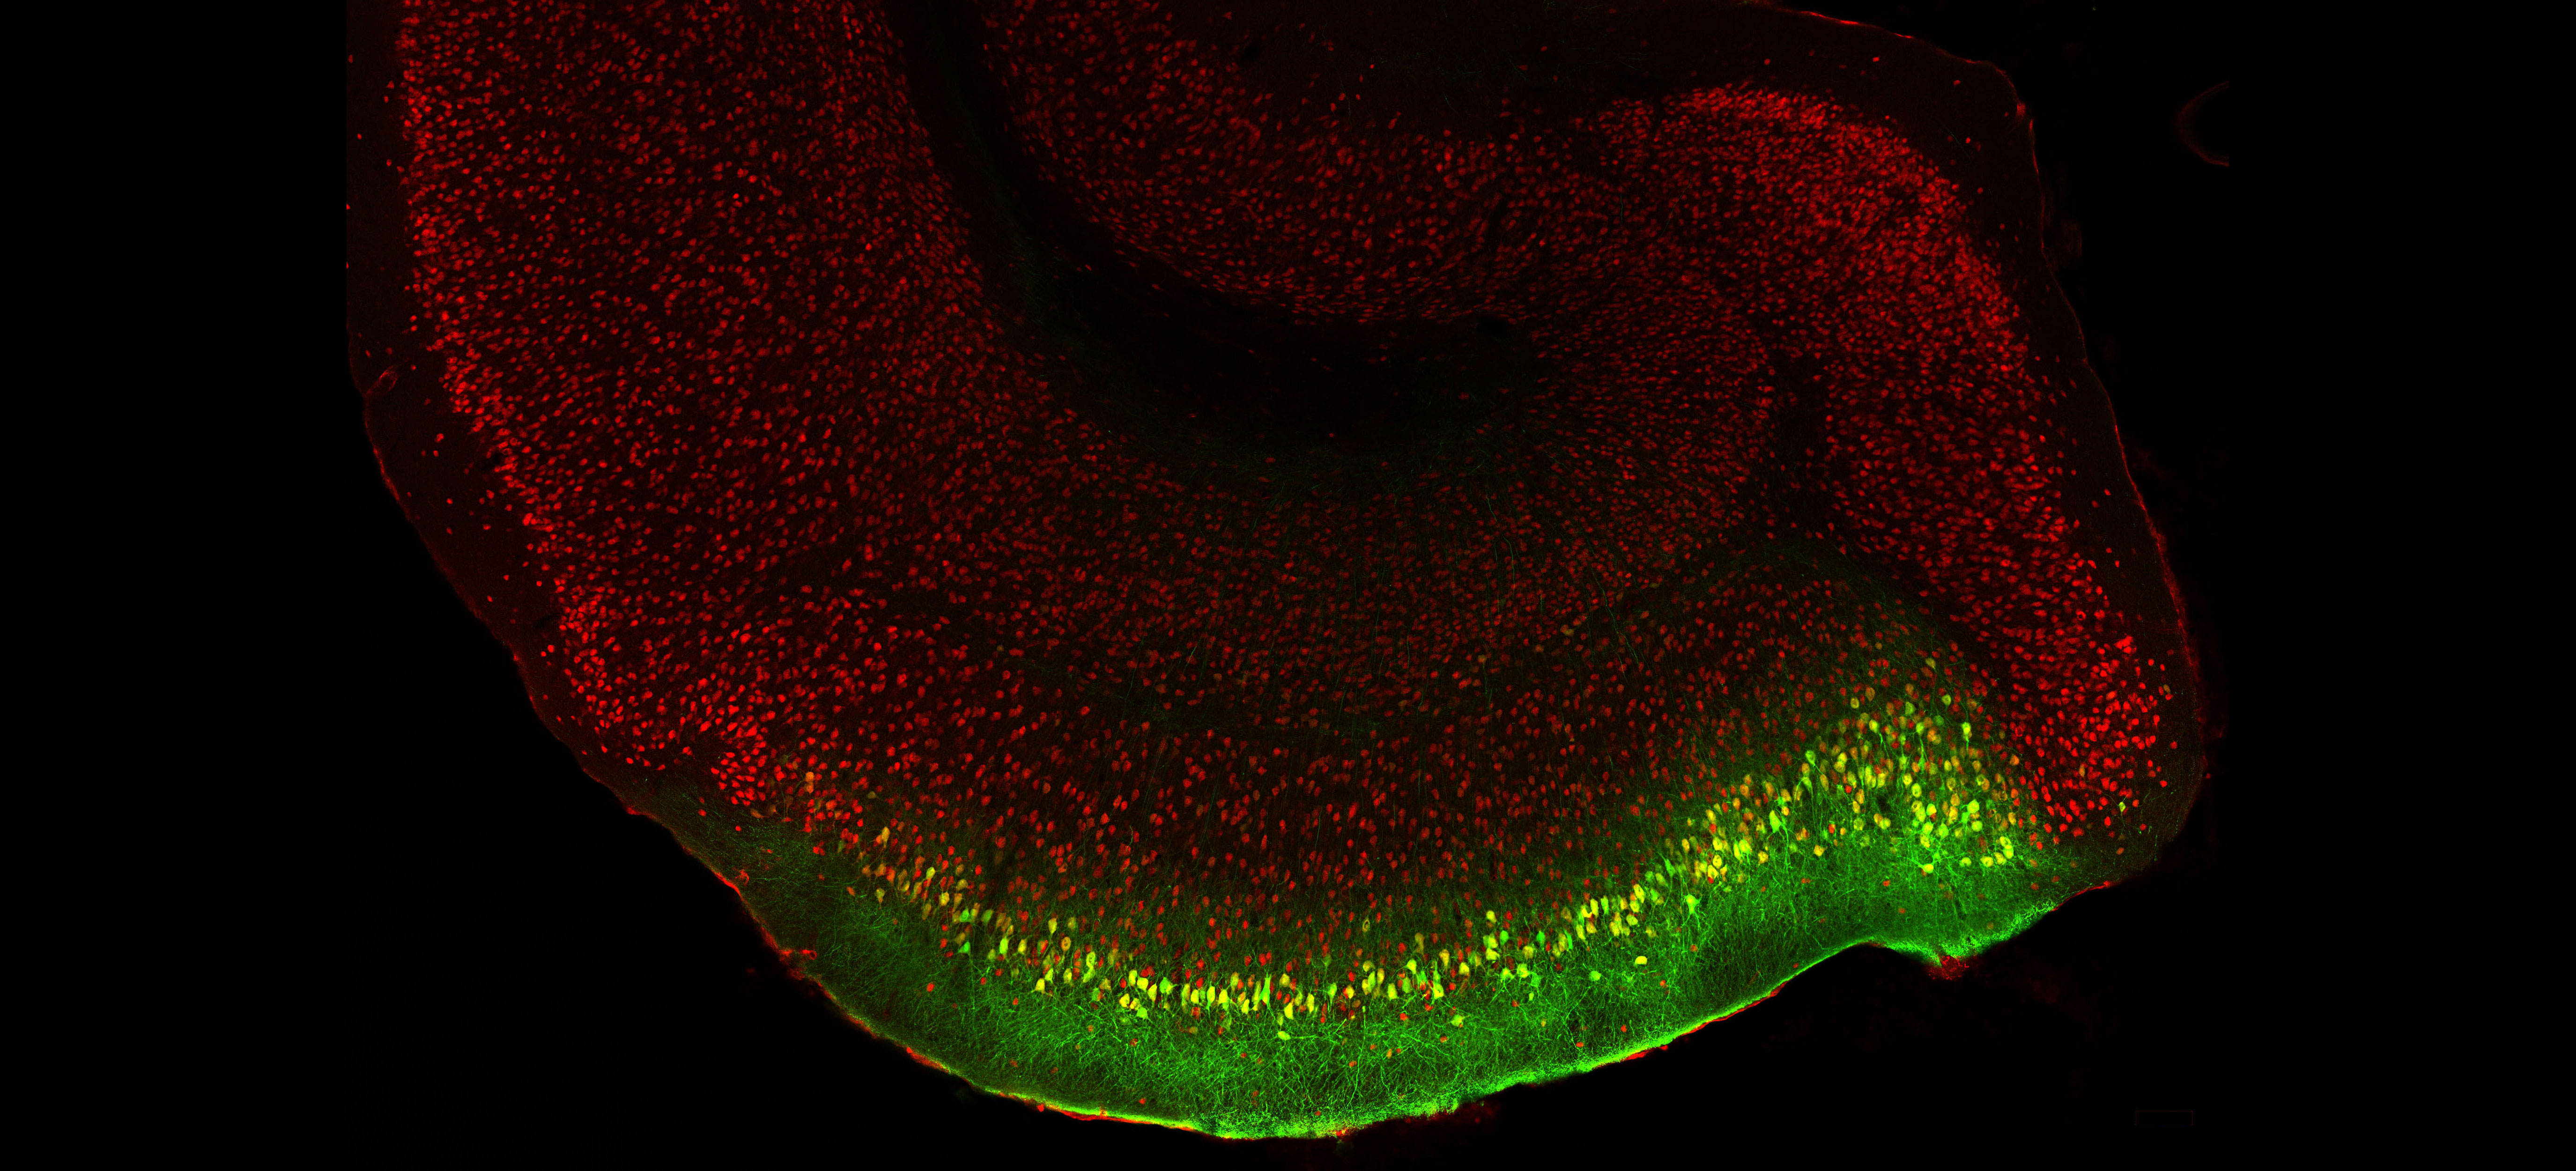 Adeno-associated virus mediated transgene expression (yellow and green color) in medial entorhinal cortex of rat brain. Neurons are shown in red color. This specific gene expression is driven by a medial entorhinal cortex specific enhancer. 